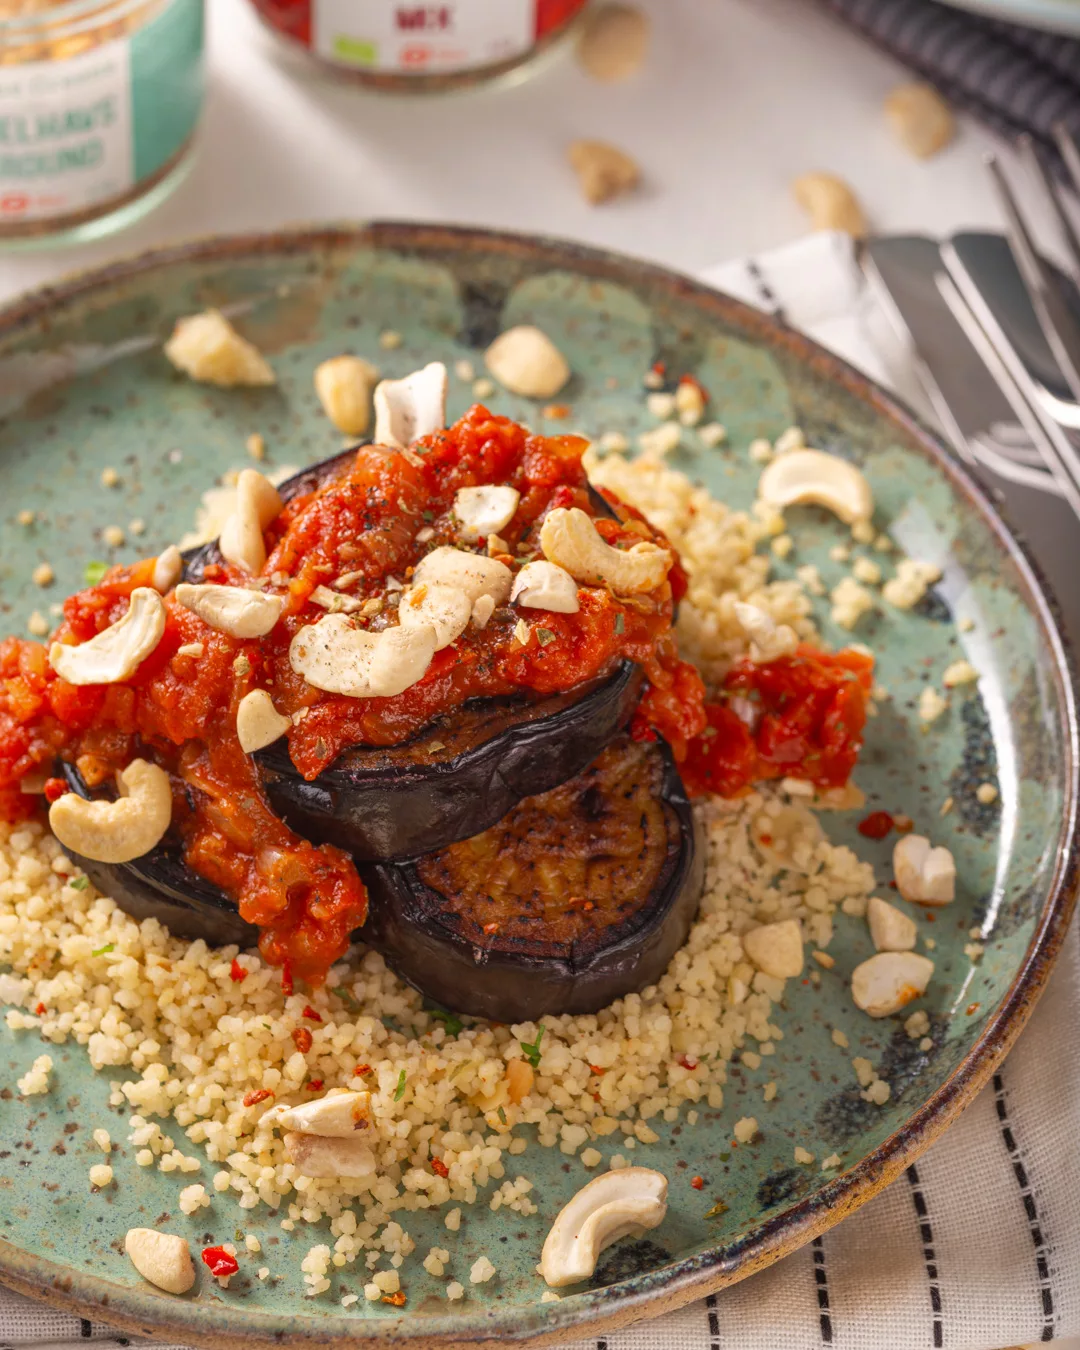 front image of a plate with eggplant topped with tomato juice on a bed of couscous